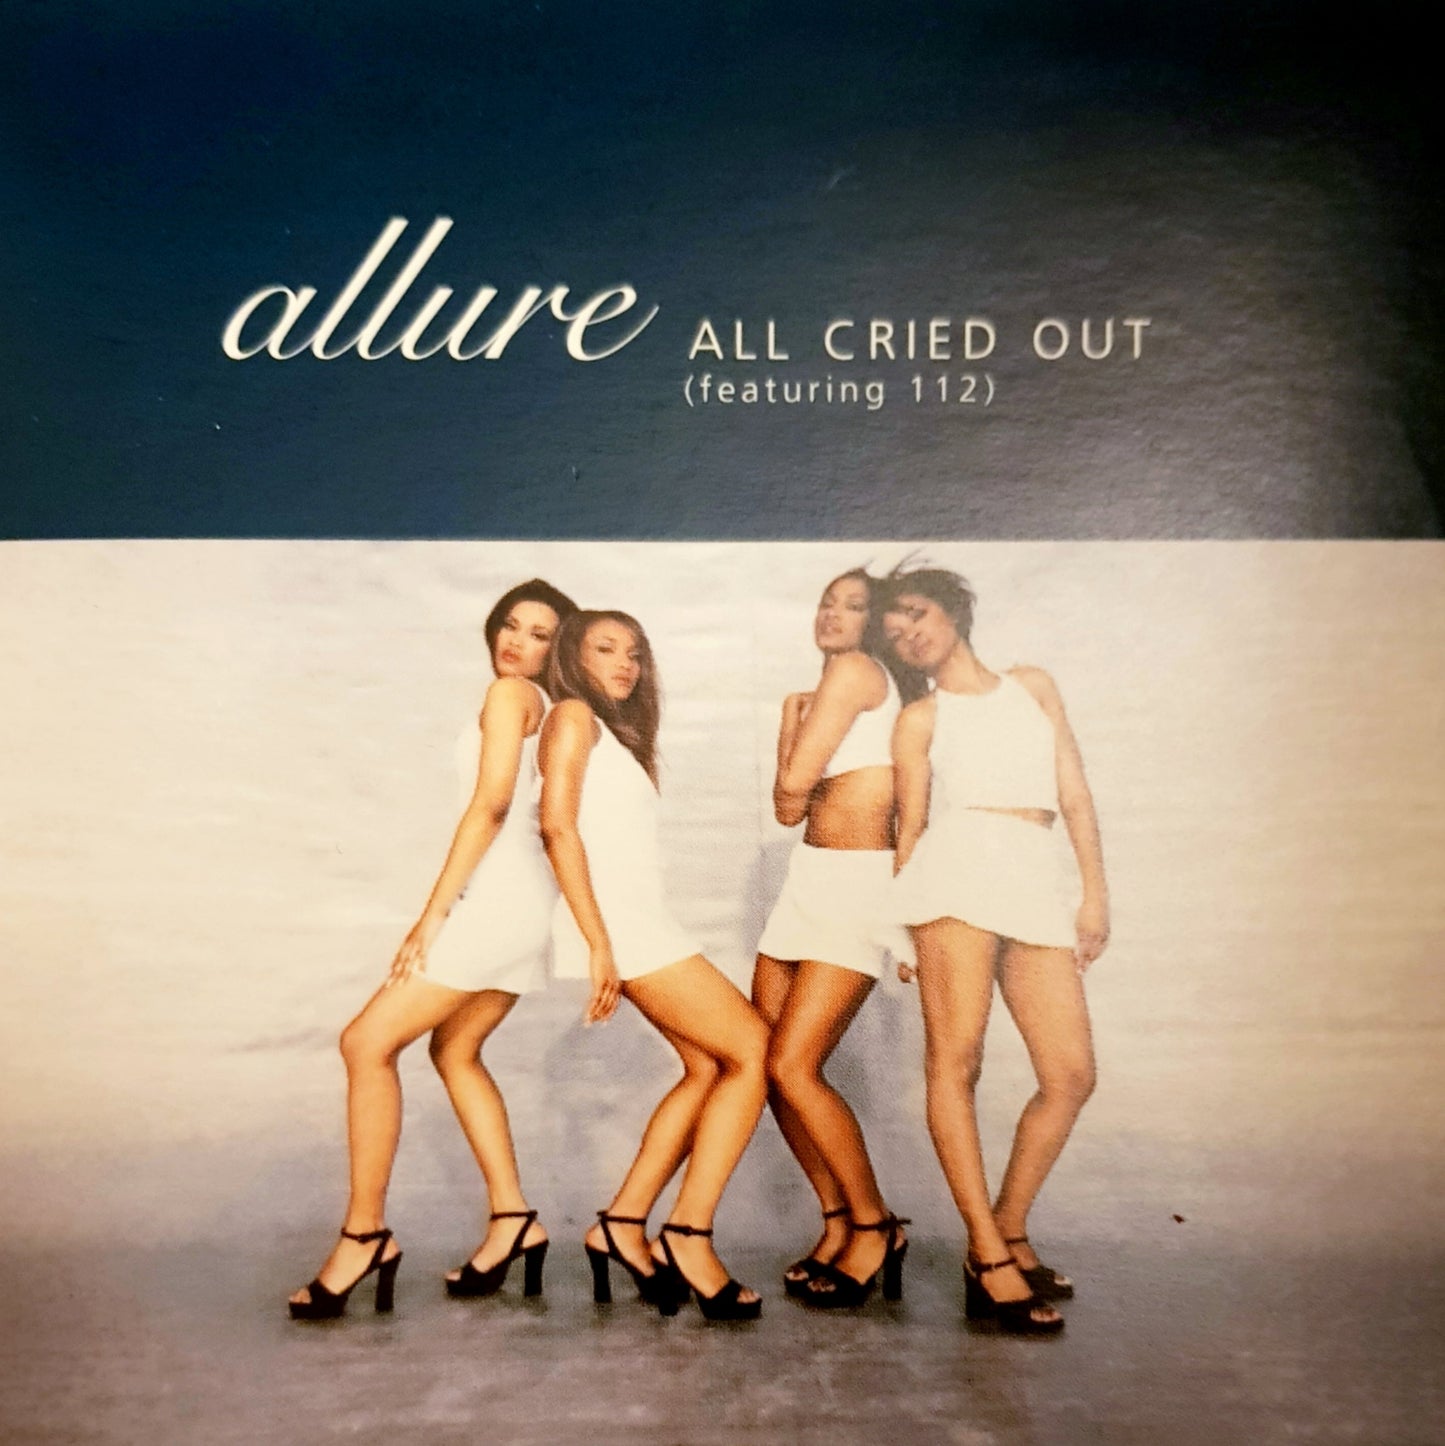 Allure Ft. 112: All Cried Out - UK-Promo-CD-Single (NM/NM)